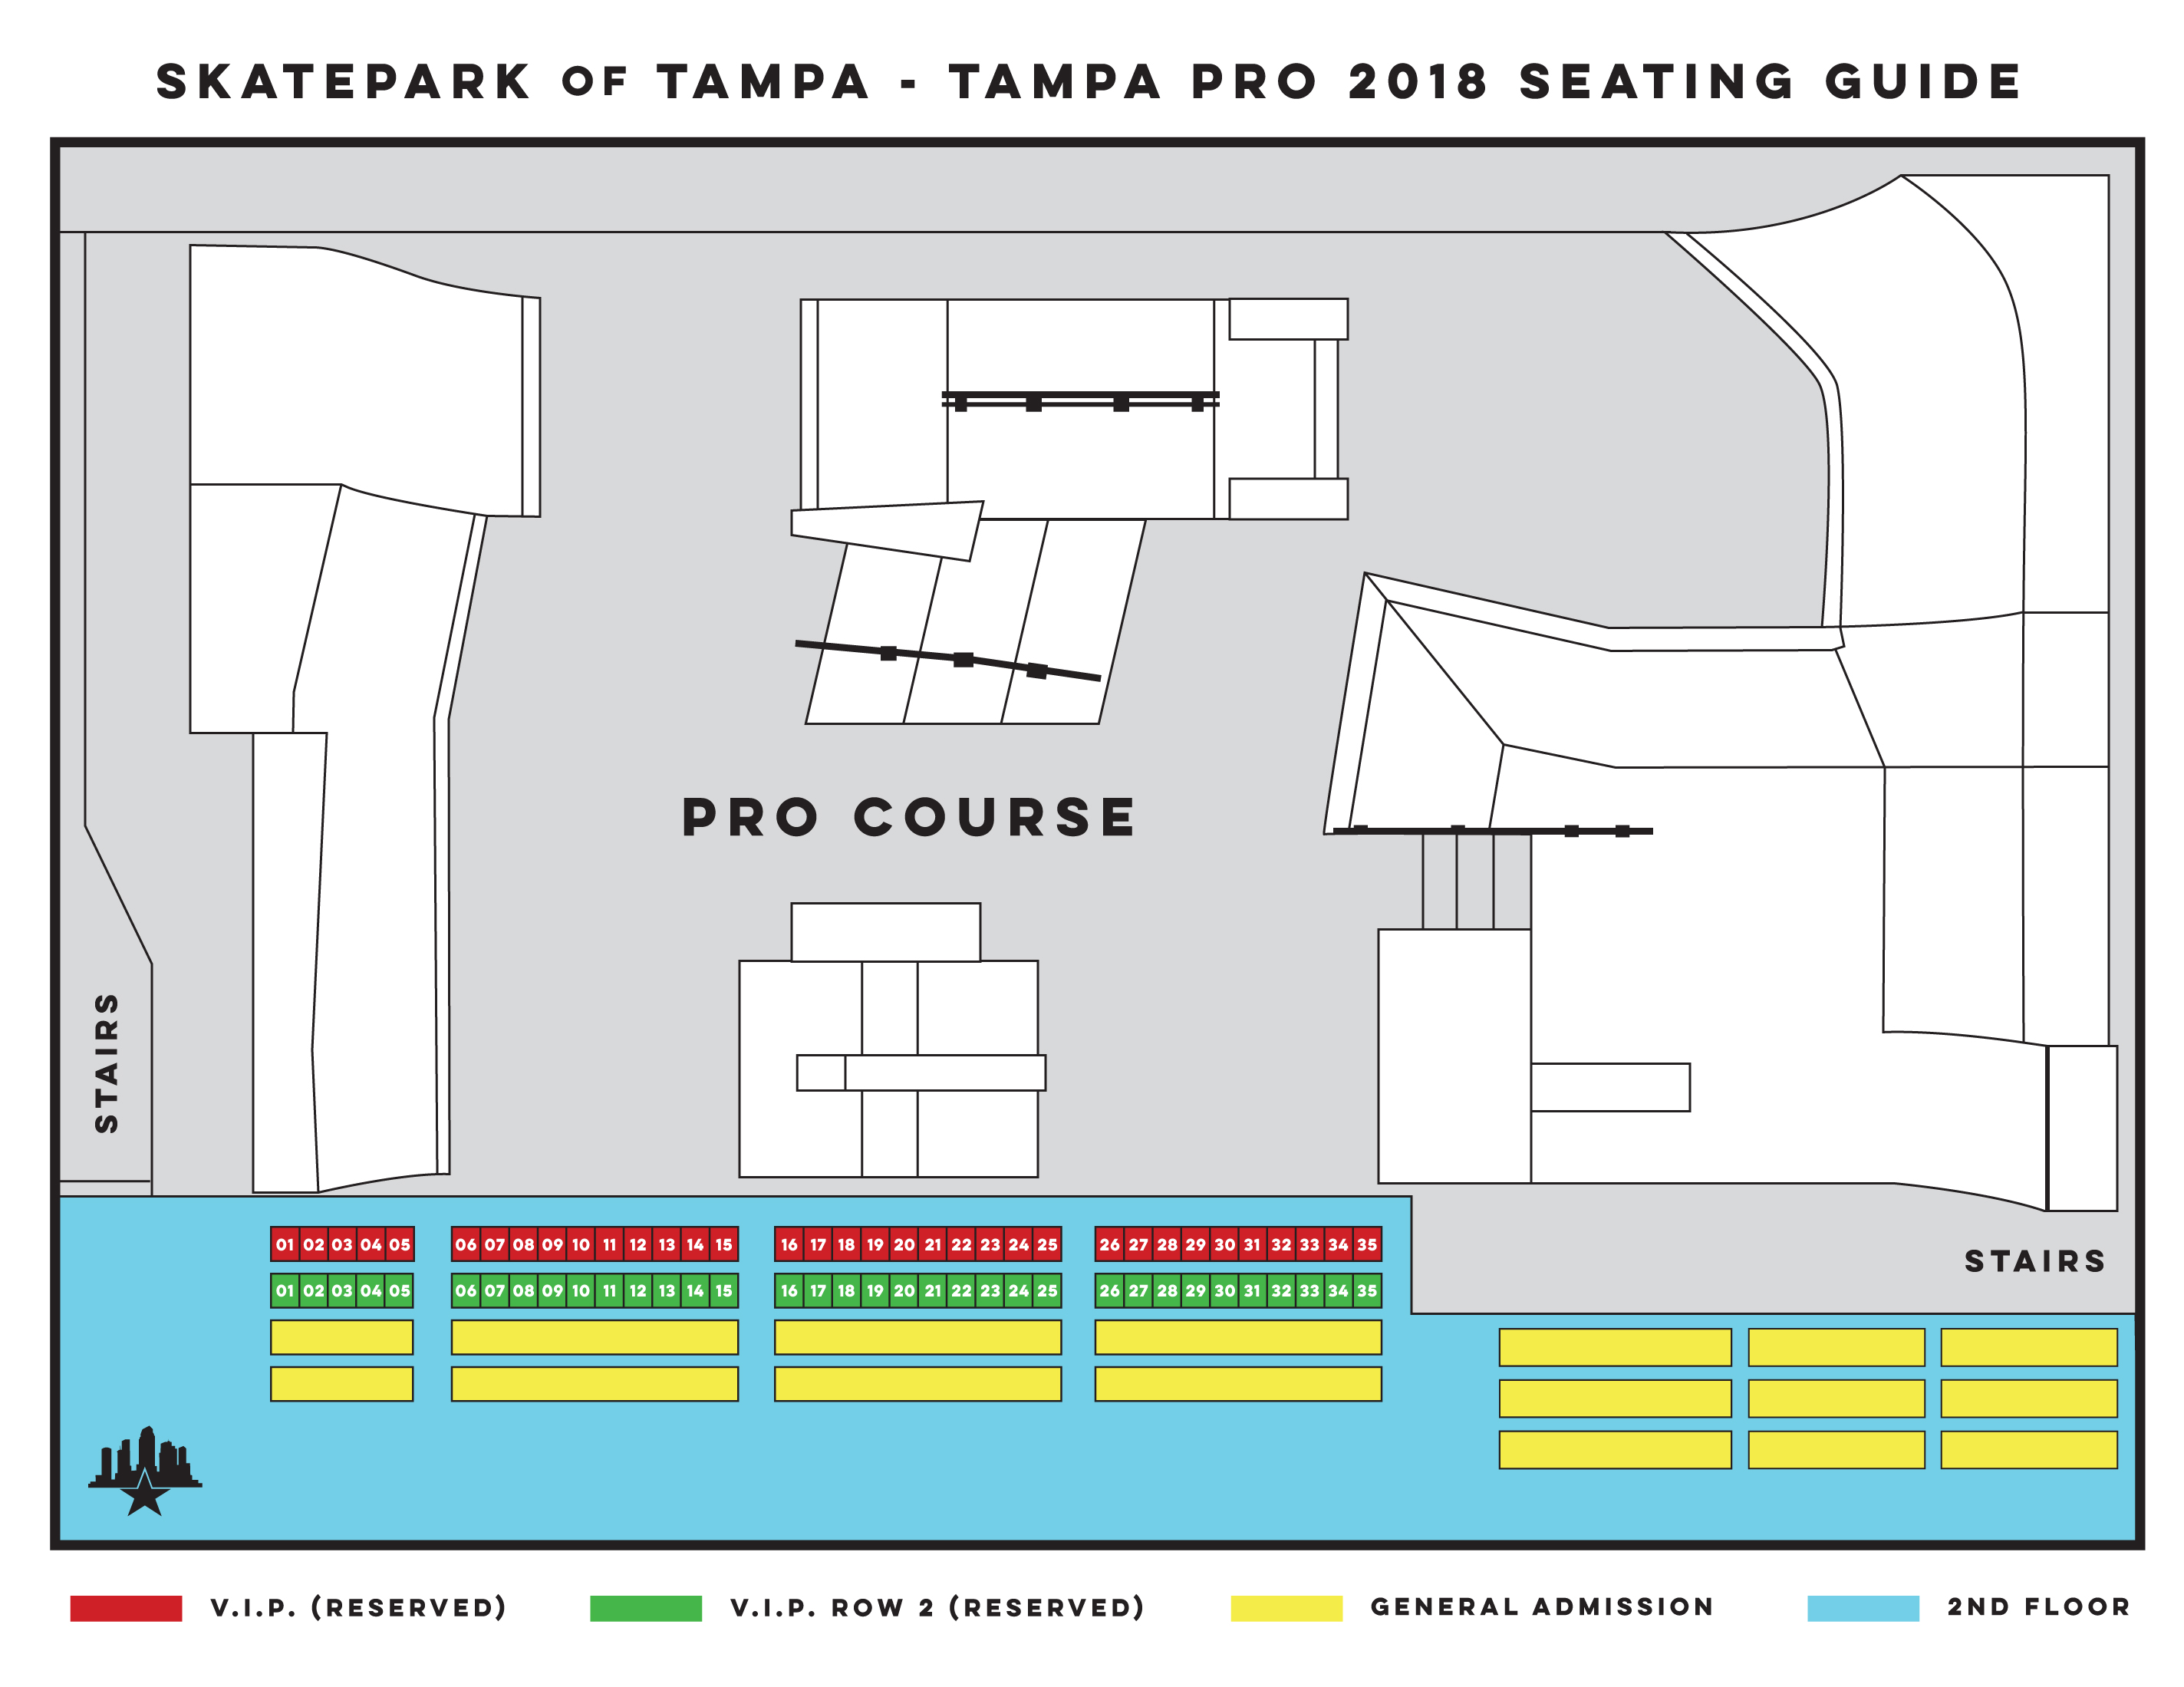 Tampa Pro 2018 Ticket Guide Article At Skatepark Of Tampa